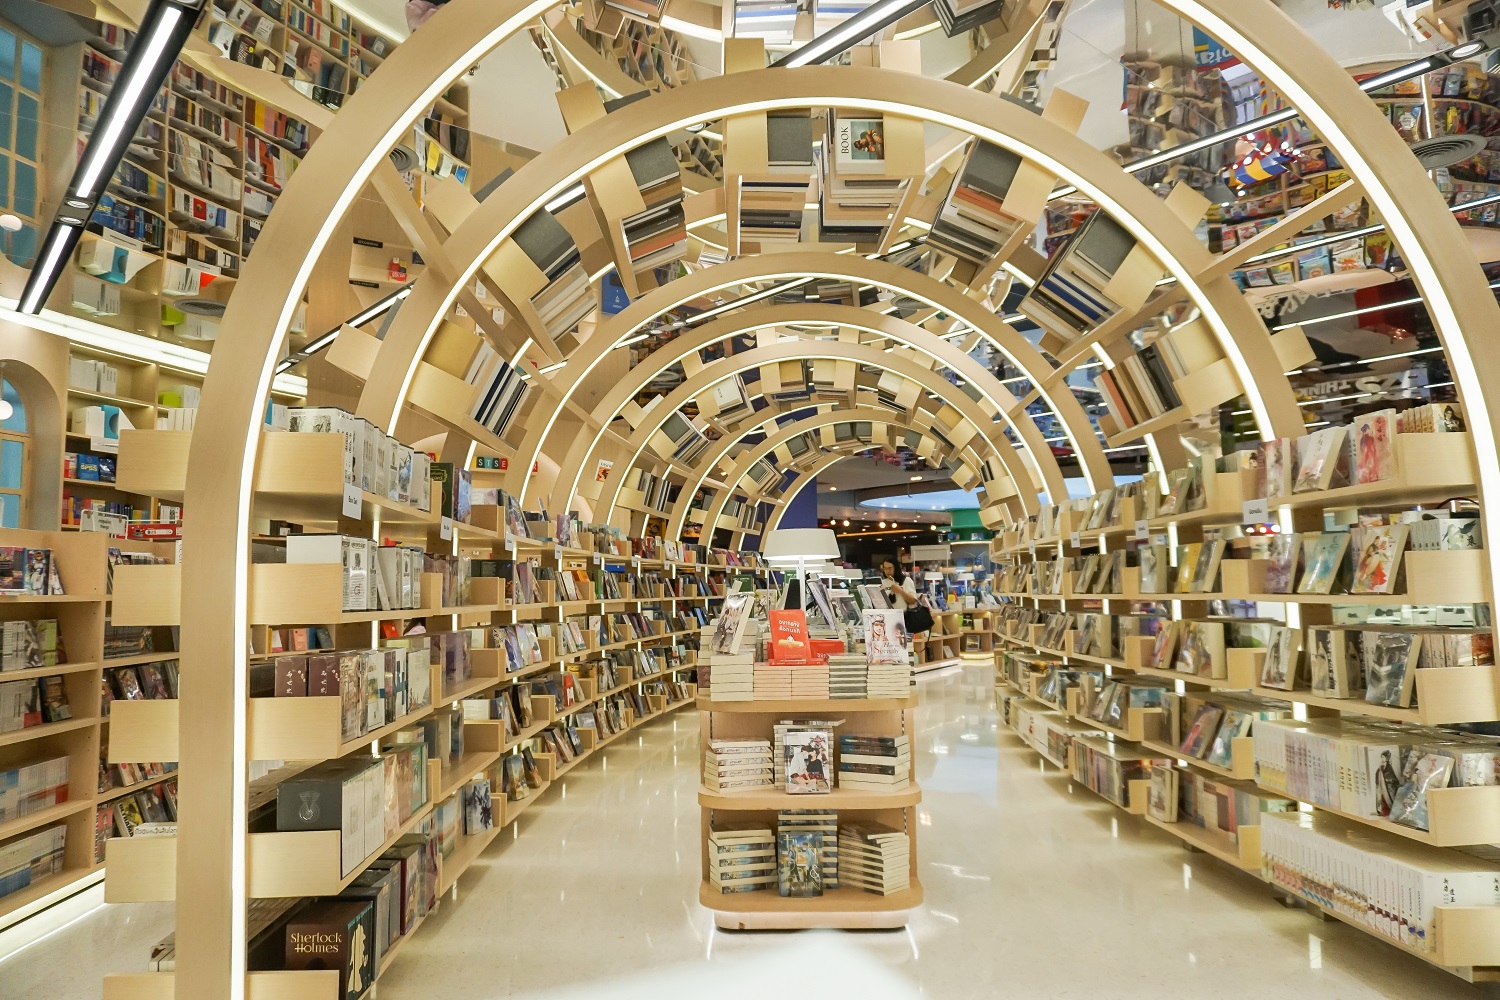 B2S Think Space inside Central Chidlom. Photo: Coconuts Bangkok